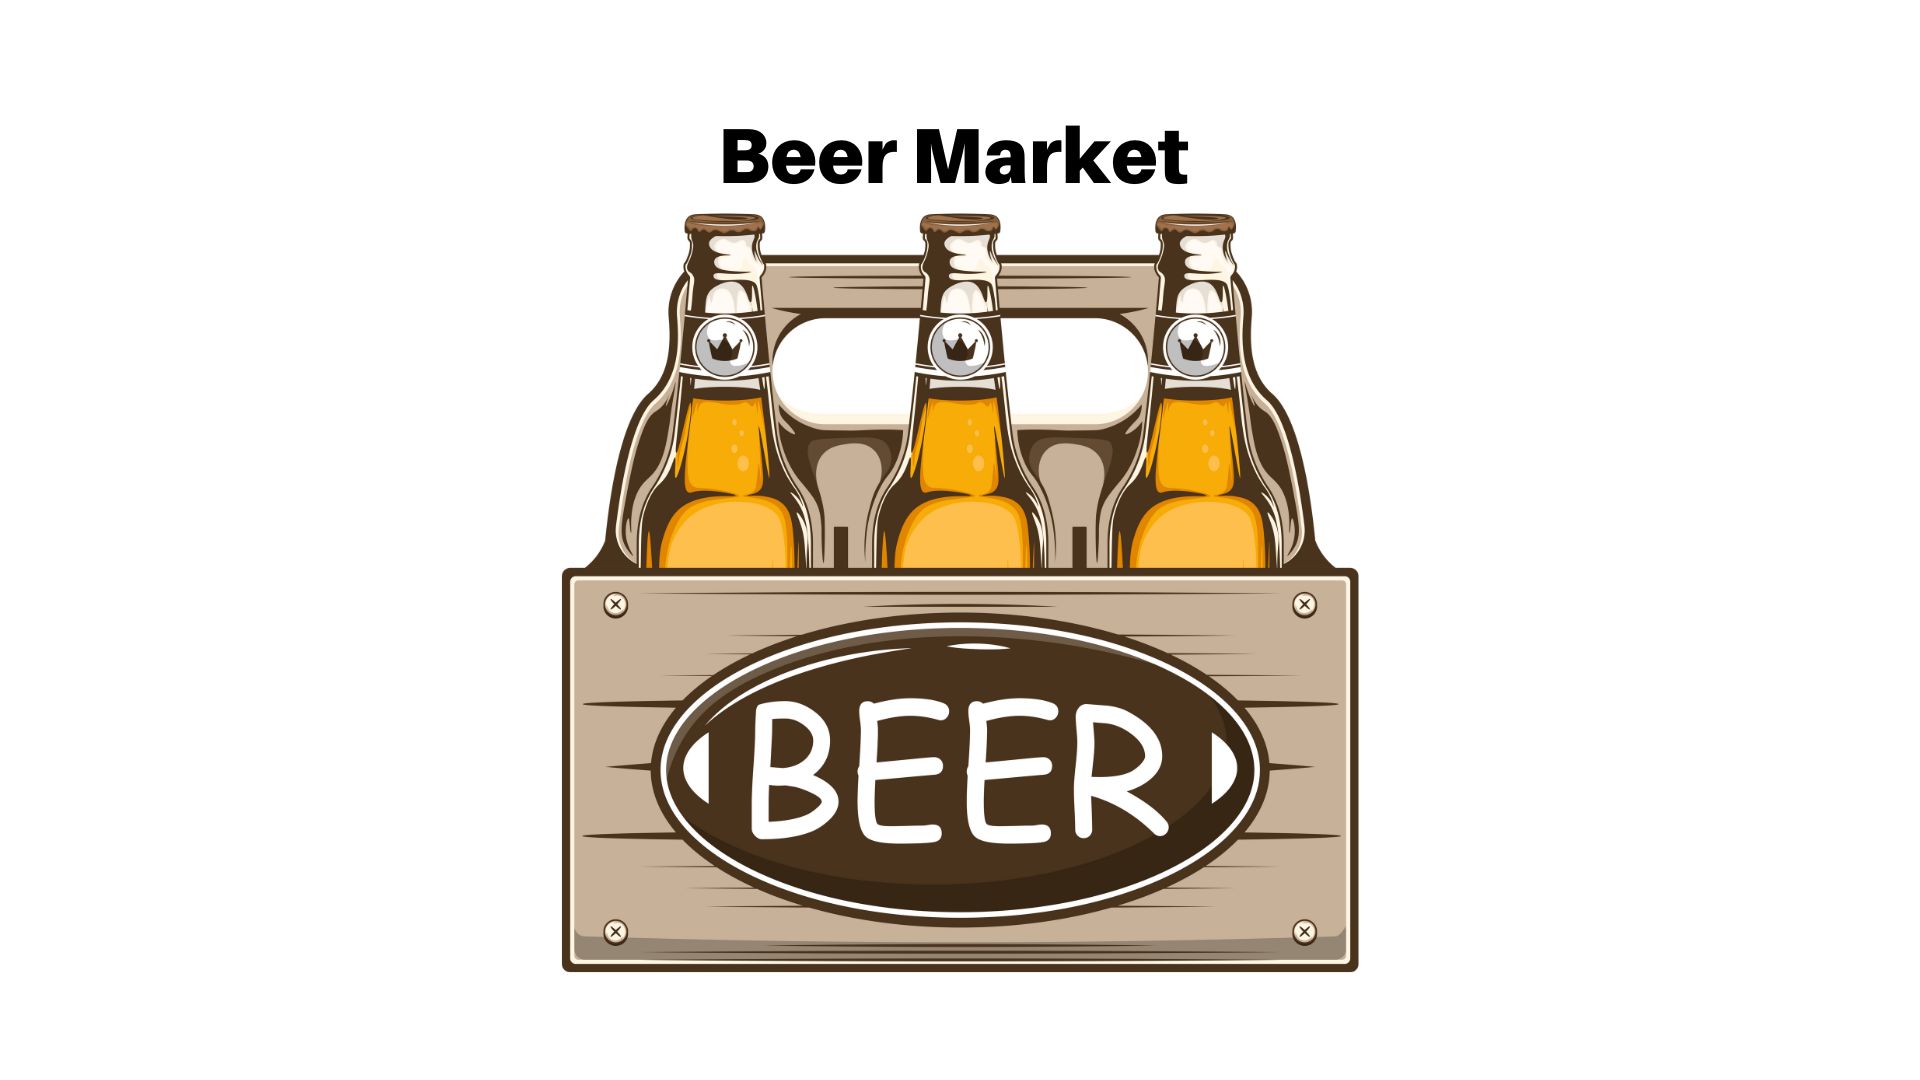 CAGR of 7% For Beer Market to Gain USD 1409.20 billion By 2032 | Vendors Analysis (Ingenico, Verifone) By 2032